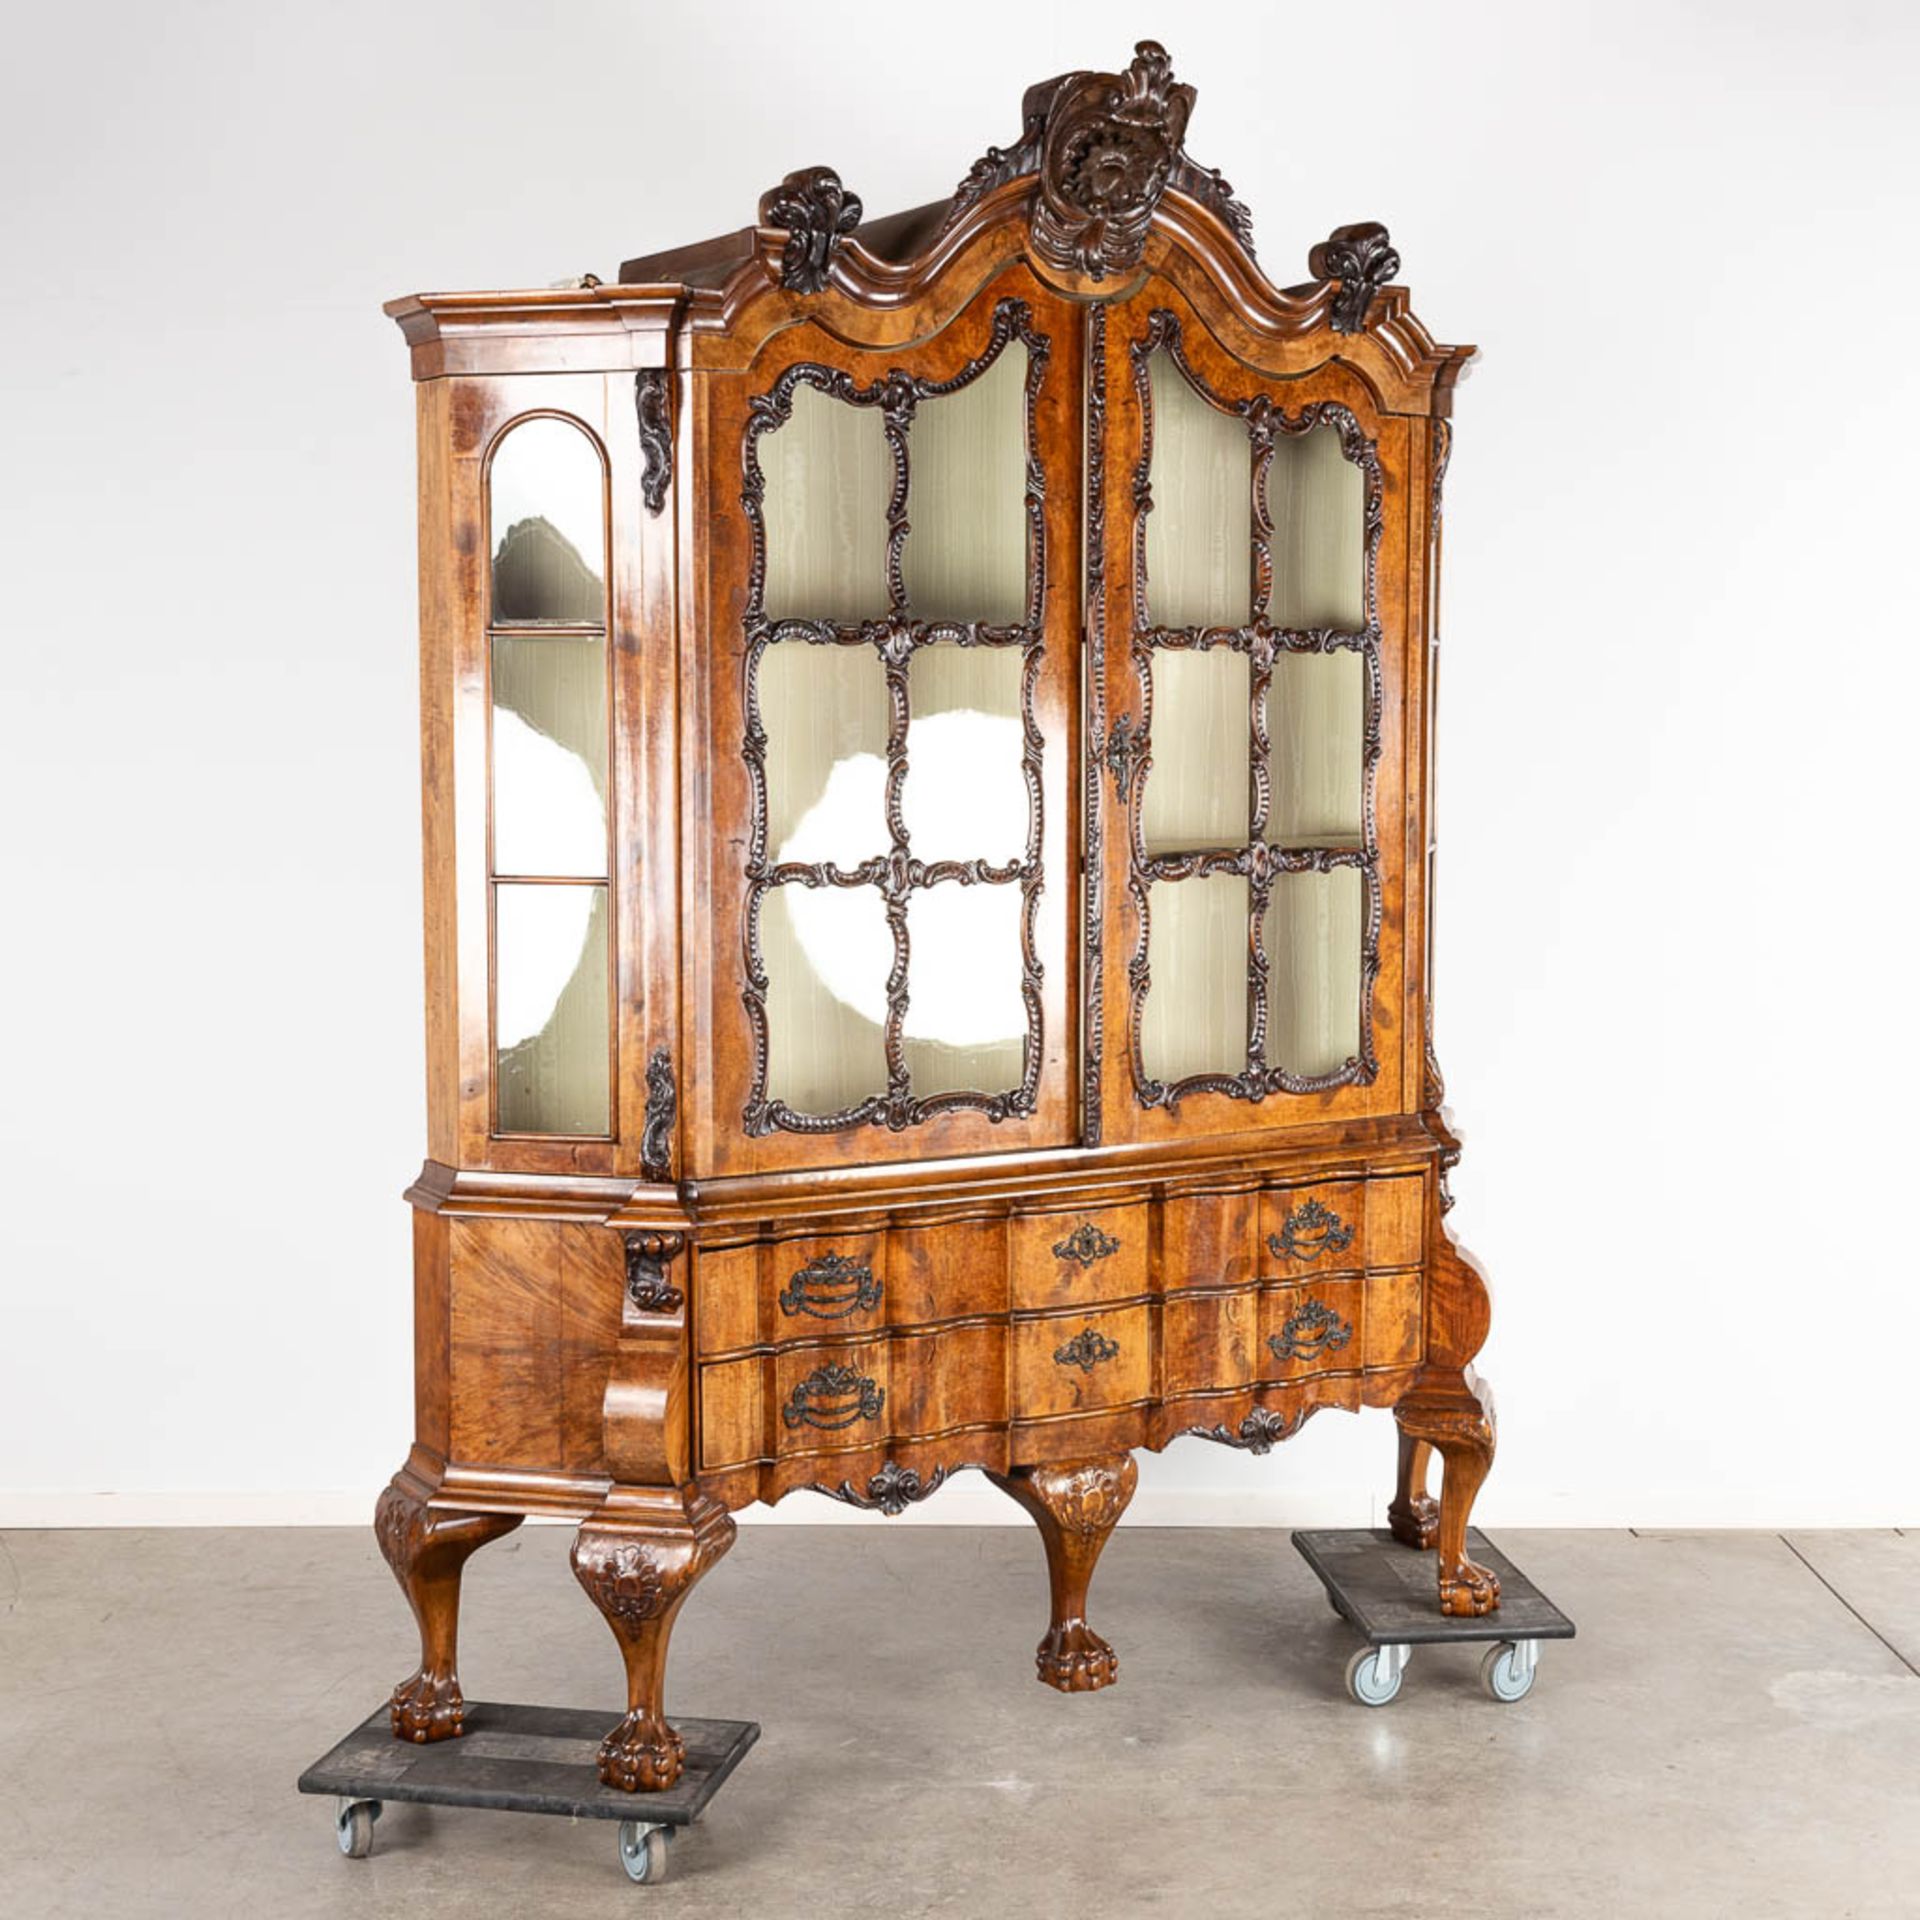 A large display cabinet, England, Chippendale style. 19th C. (D:53 x W:208 x H:252 cm) - Image 5 of 20